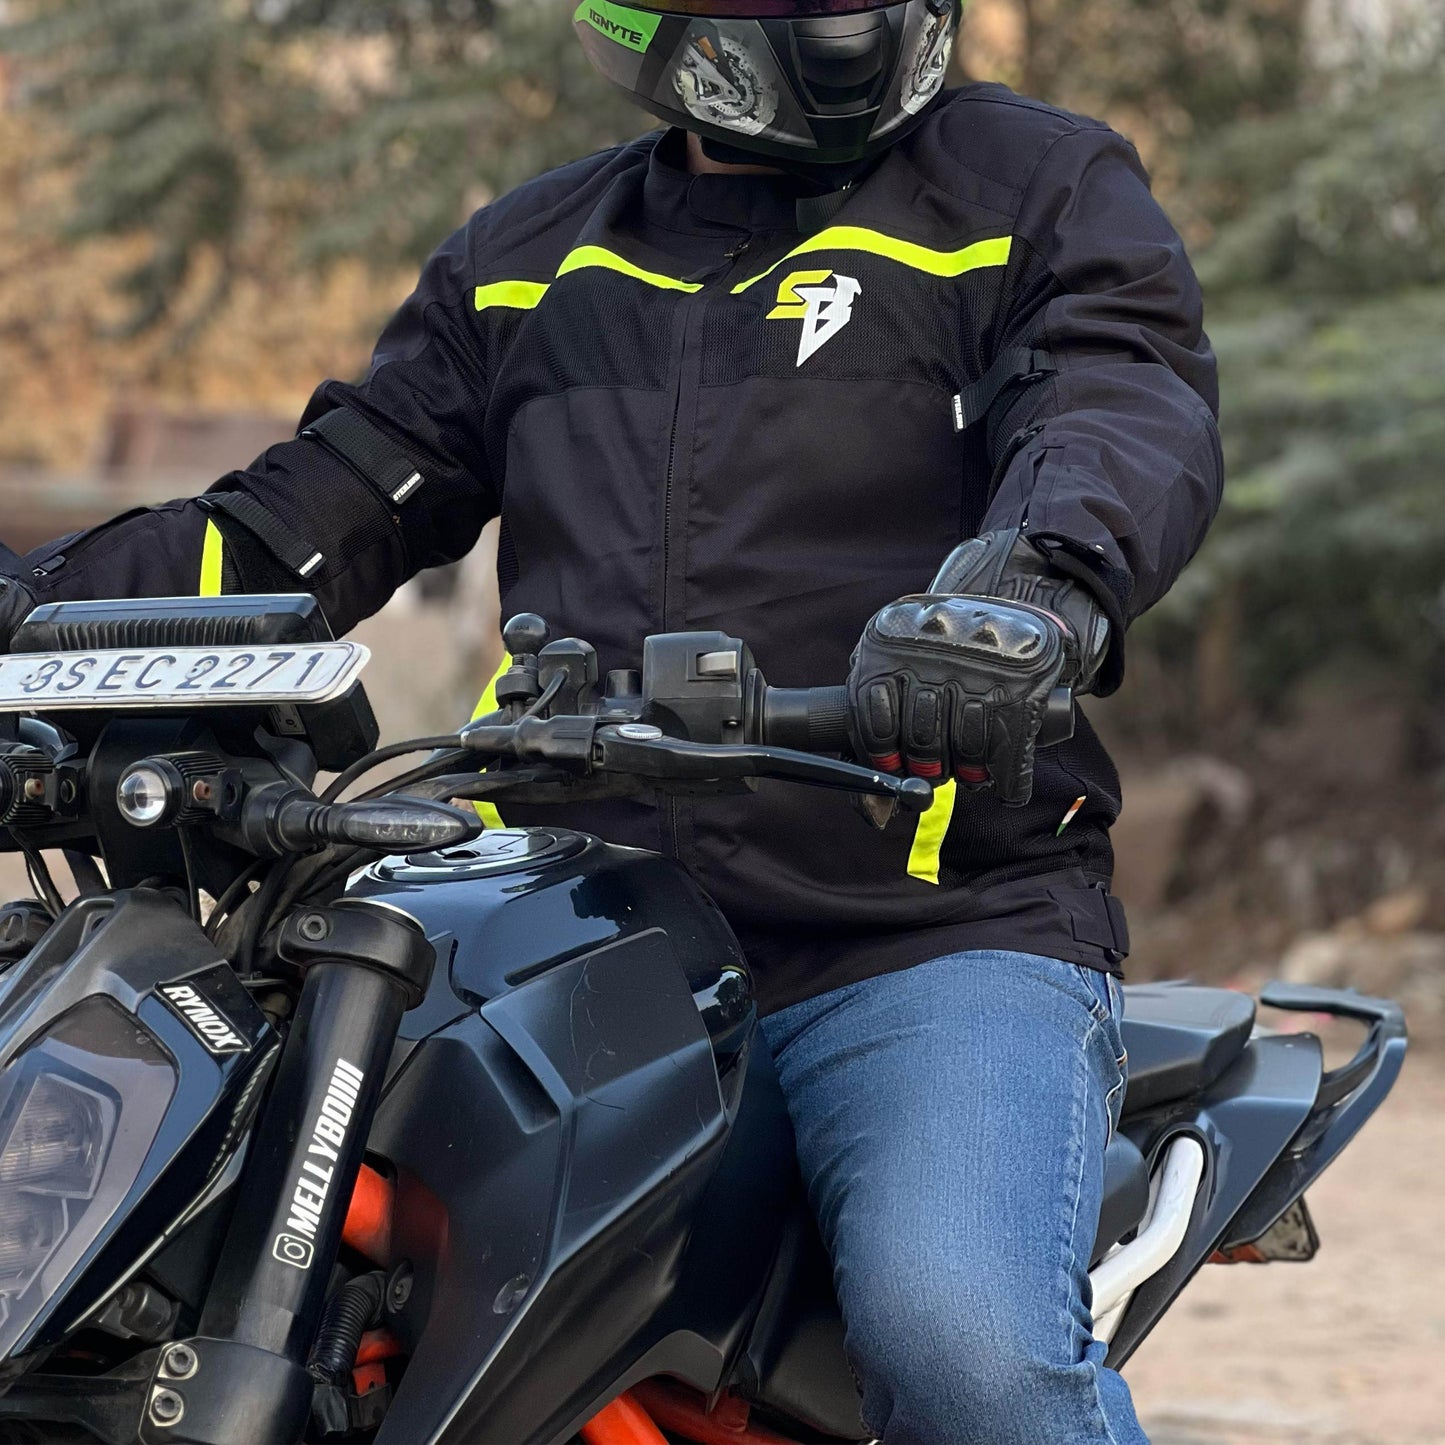 Steelbird Riding Jacket Zojila Z2 with Accordian Panel and Chest Pad - Removable CE Level 2 Protector and Zippered cuff (Neon)